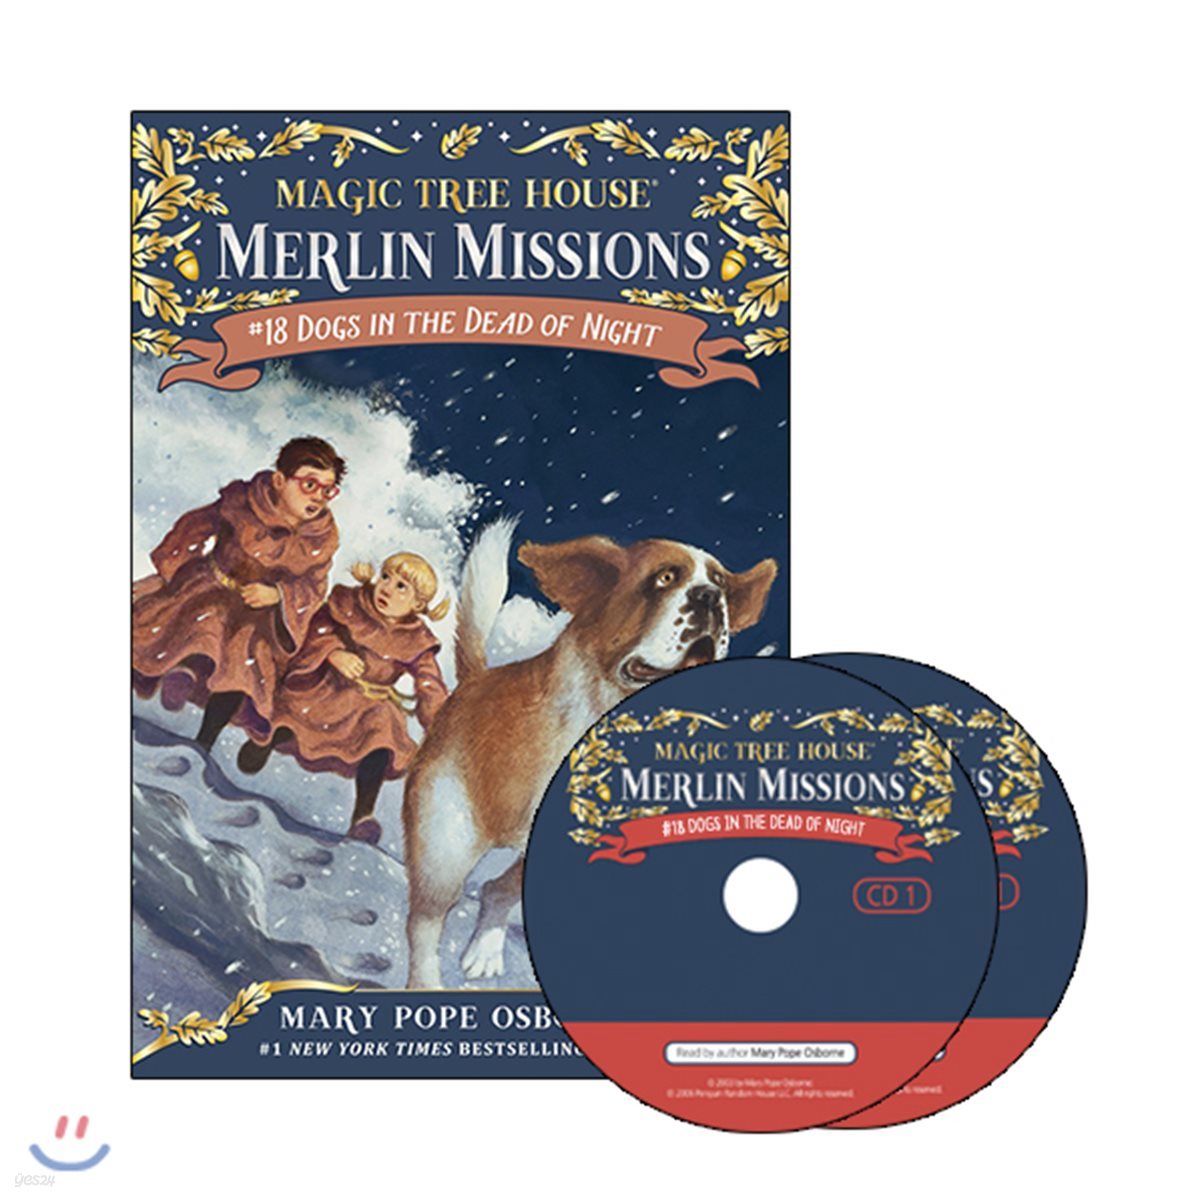 Merlin Mission #18 : Dogs in the Dead of Night